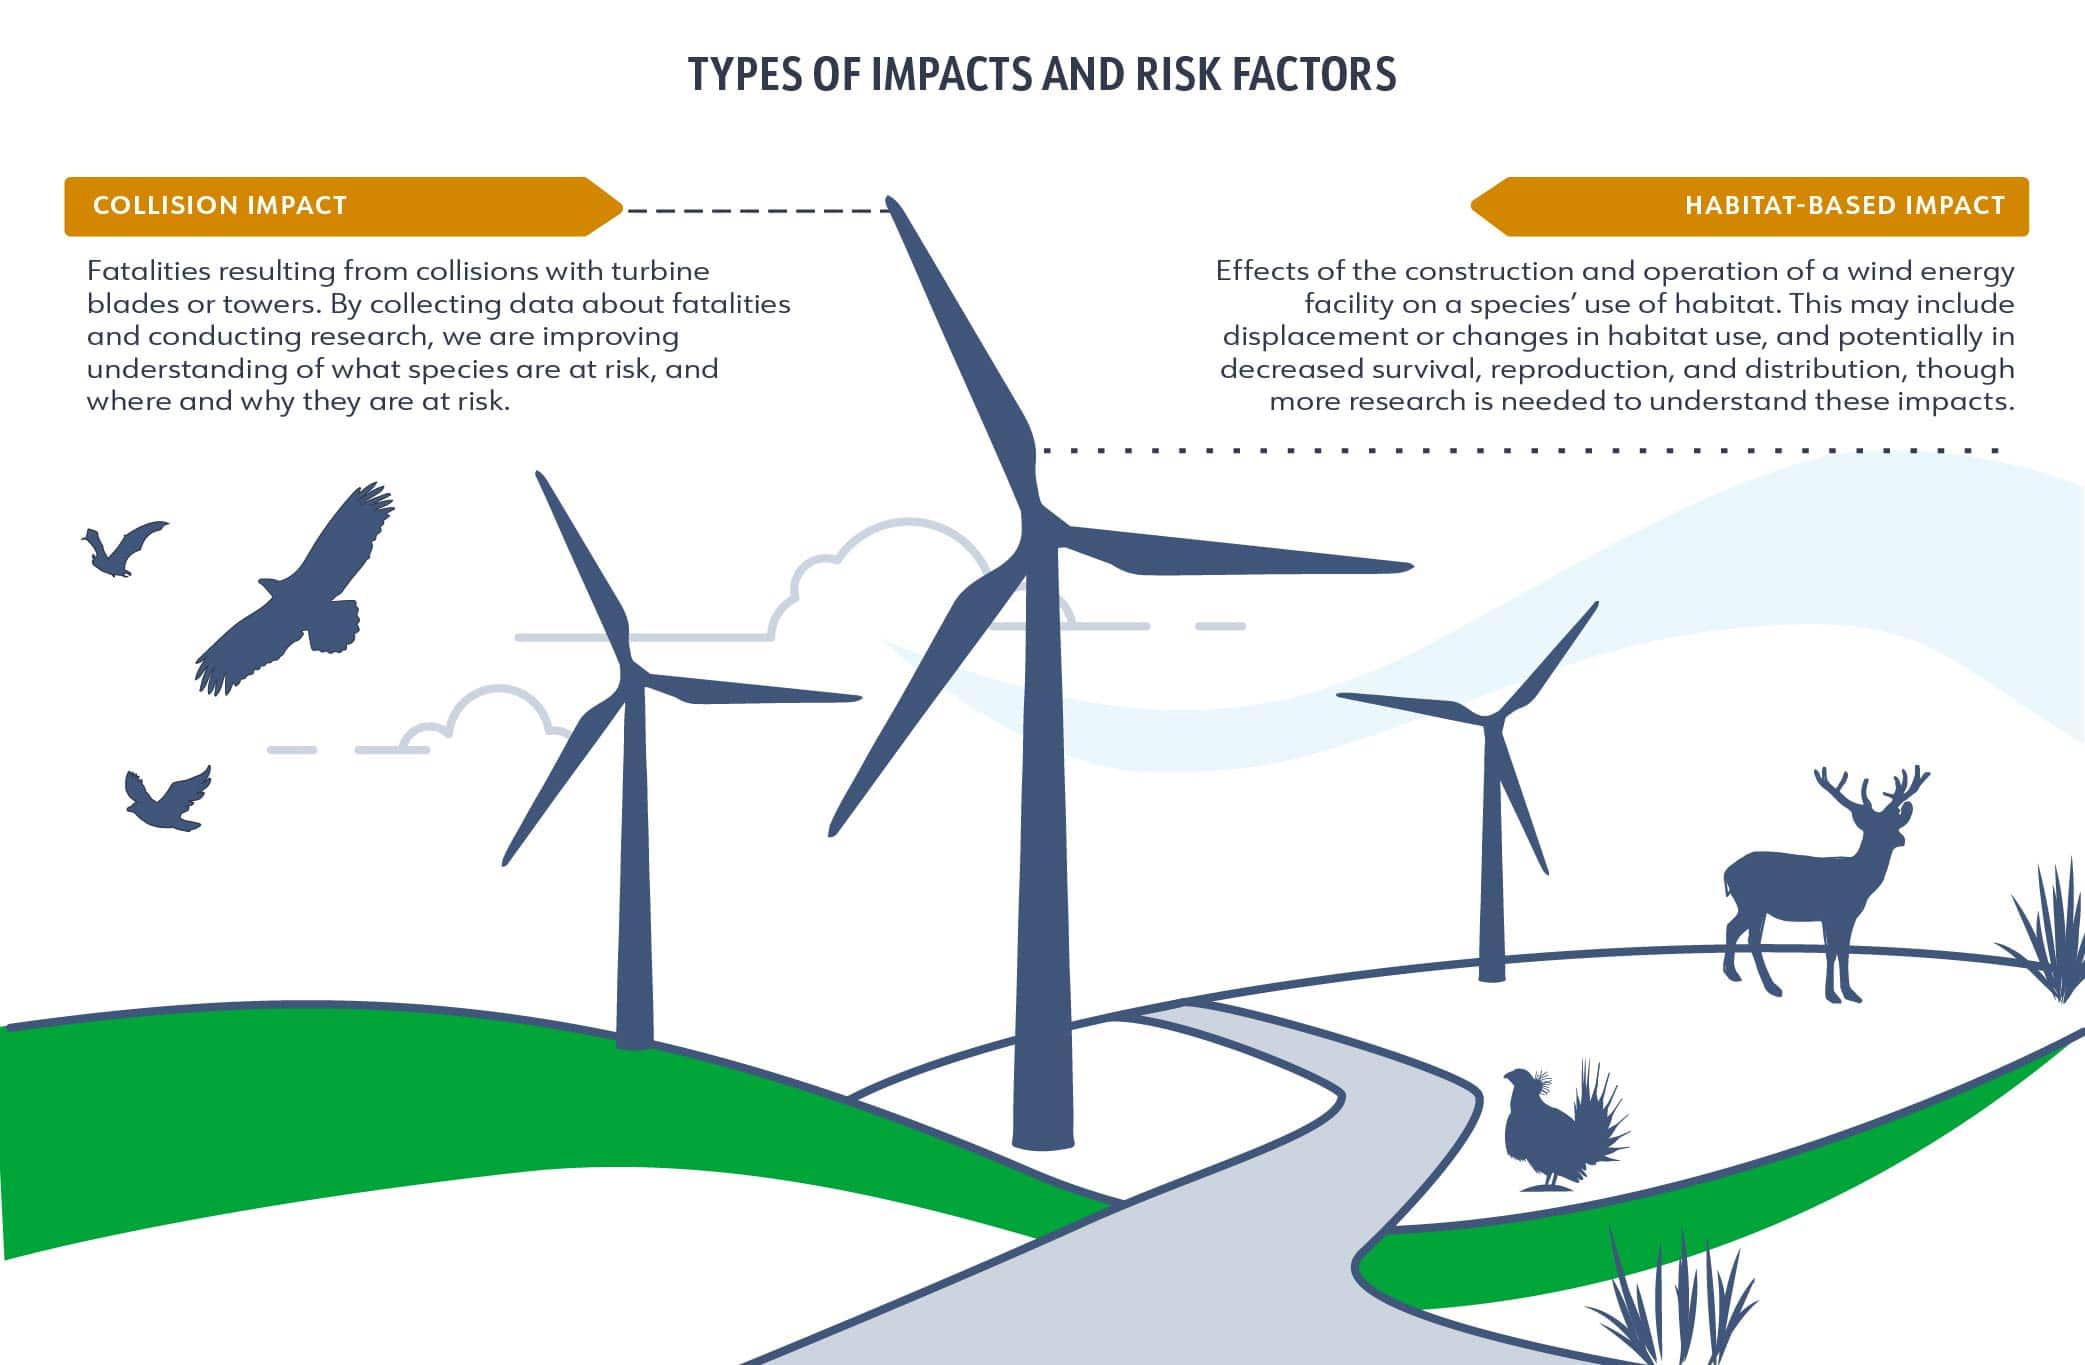 Types of Impacts & Risk Factors - Infographic by AWWI